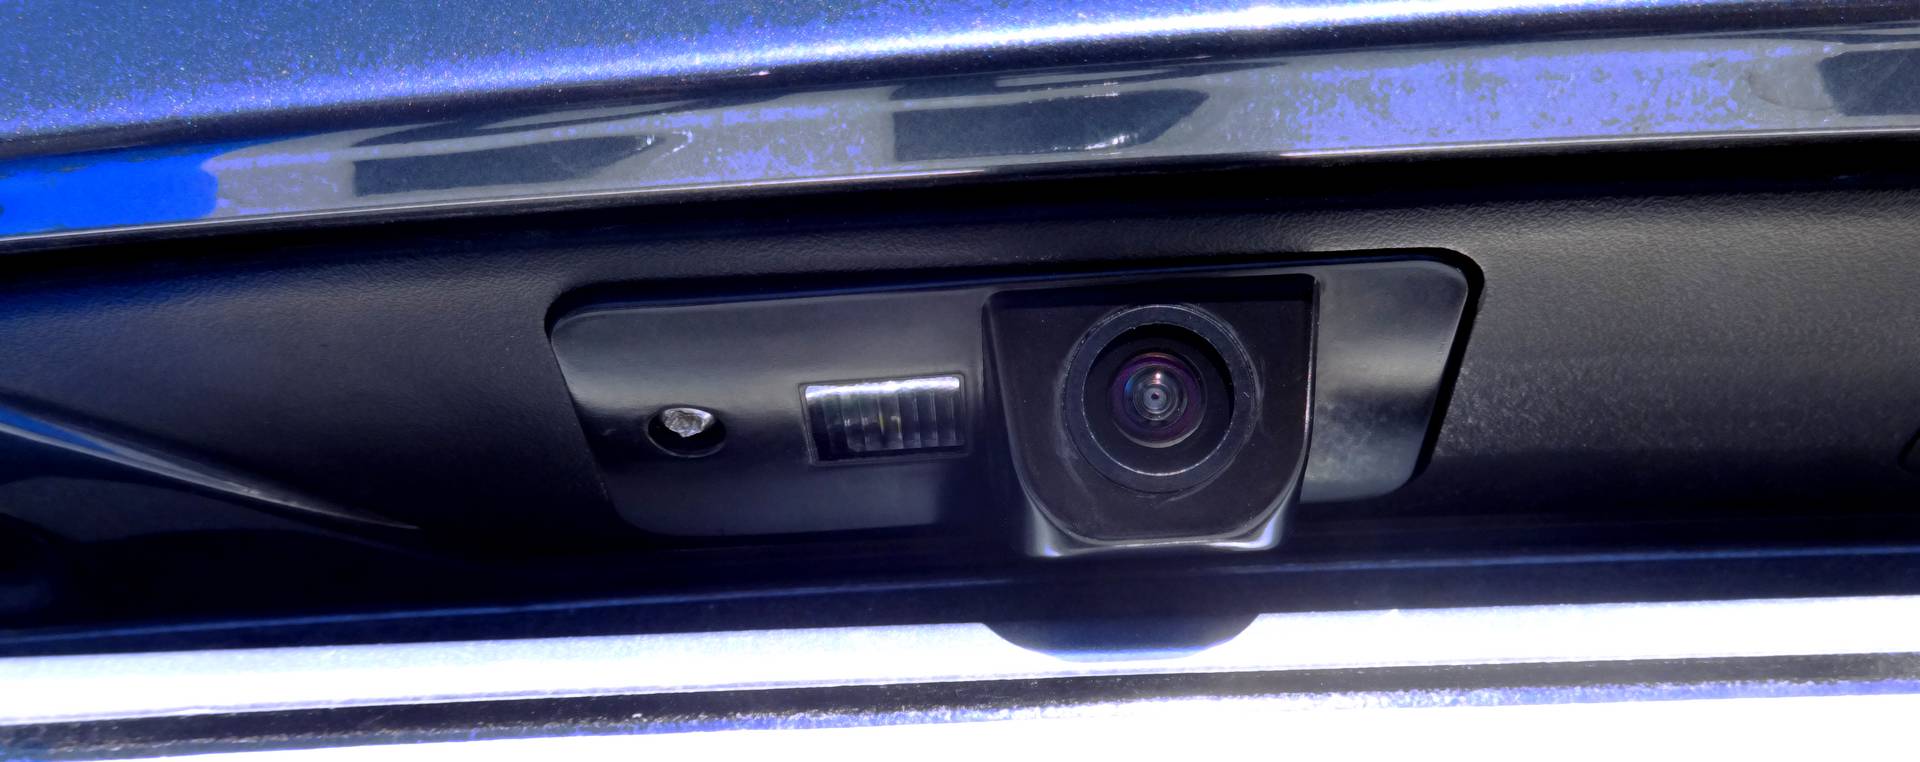 The rear camera installed in the car.